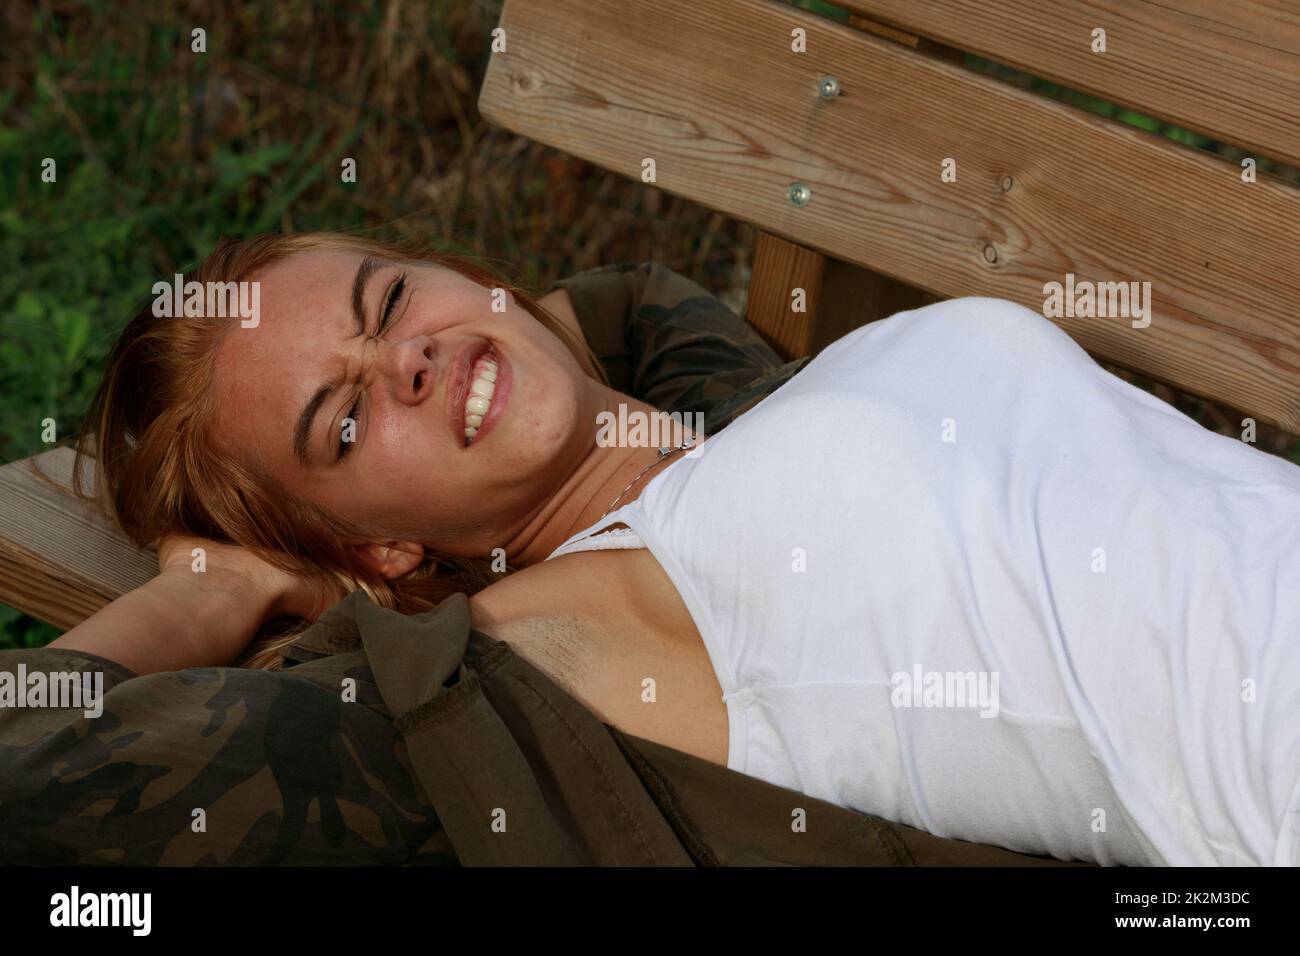 Young woman grimacing in distaste and aversion Stock Photo